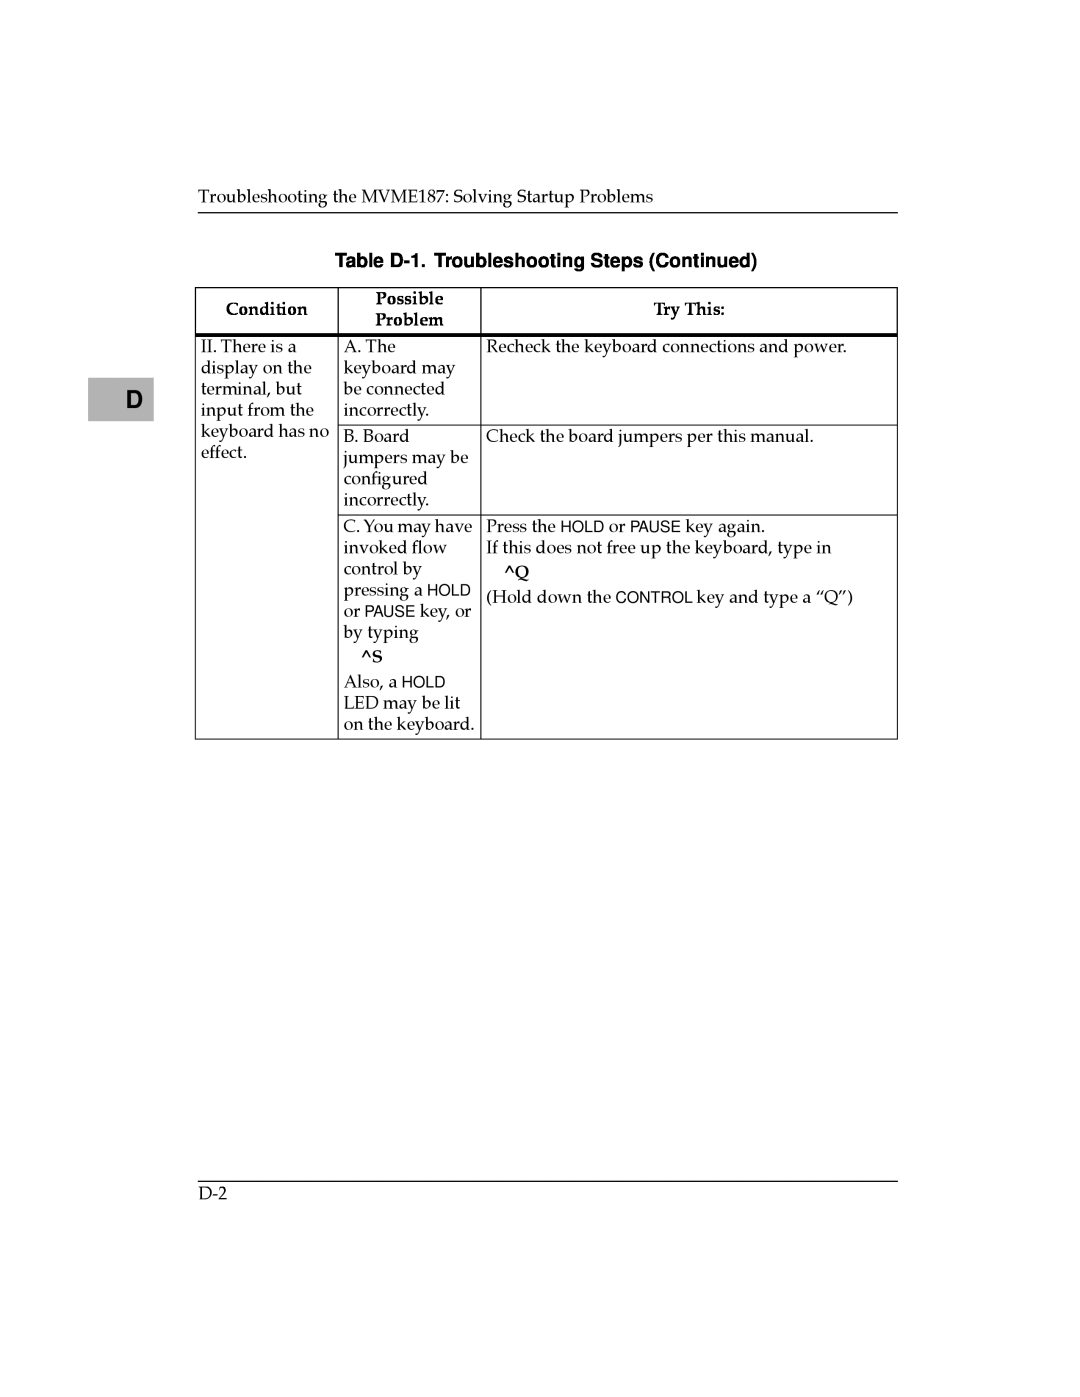 Motorola MVME187 manual Table D-1. Troubleshooting Steps Continued 